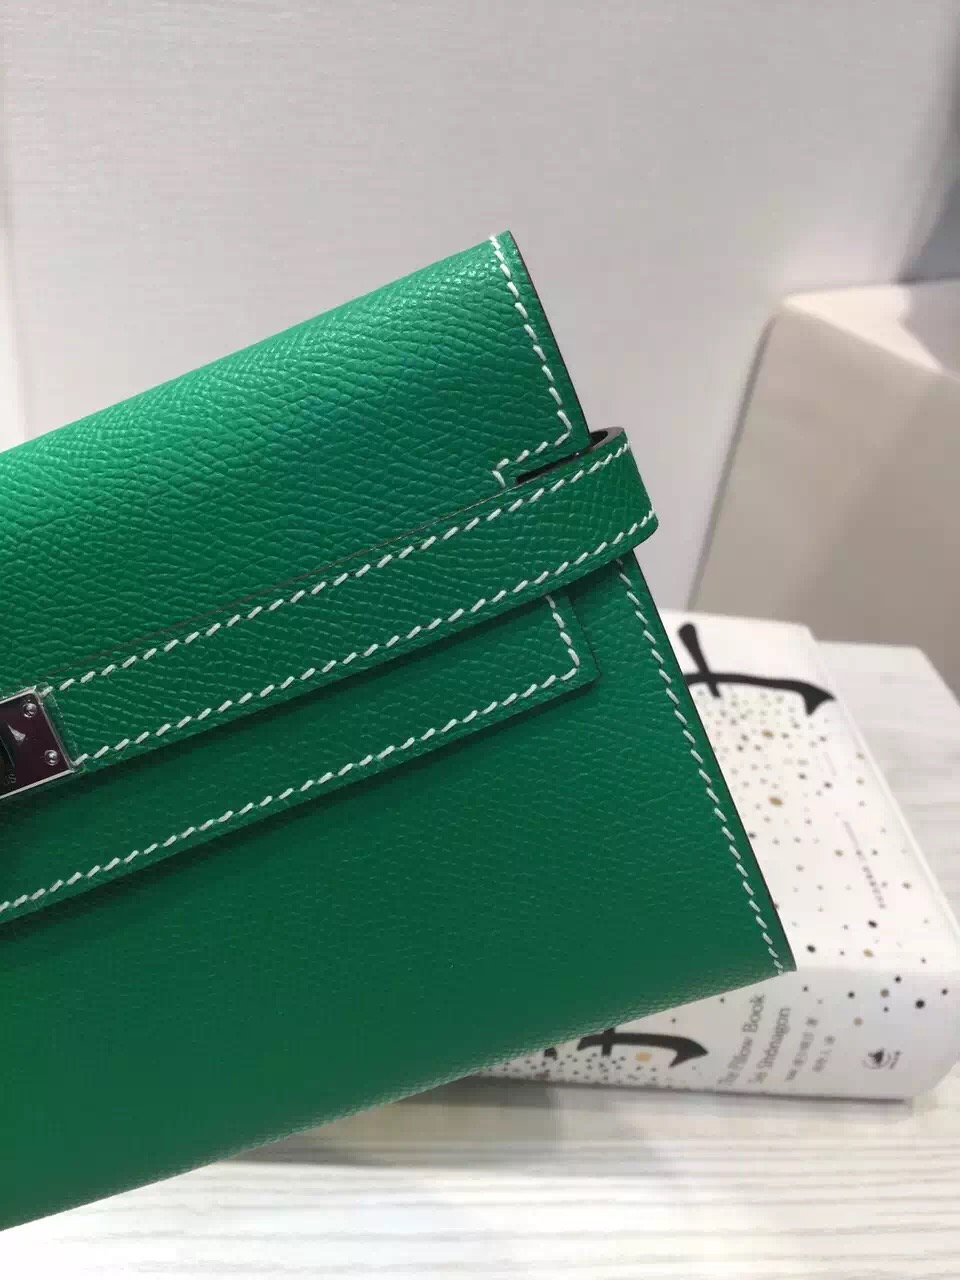 Discount Hermes Epsom Leather Bamboo Green Kelly Wallet Clutch ...  